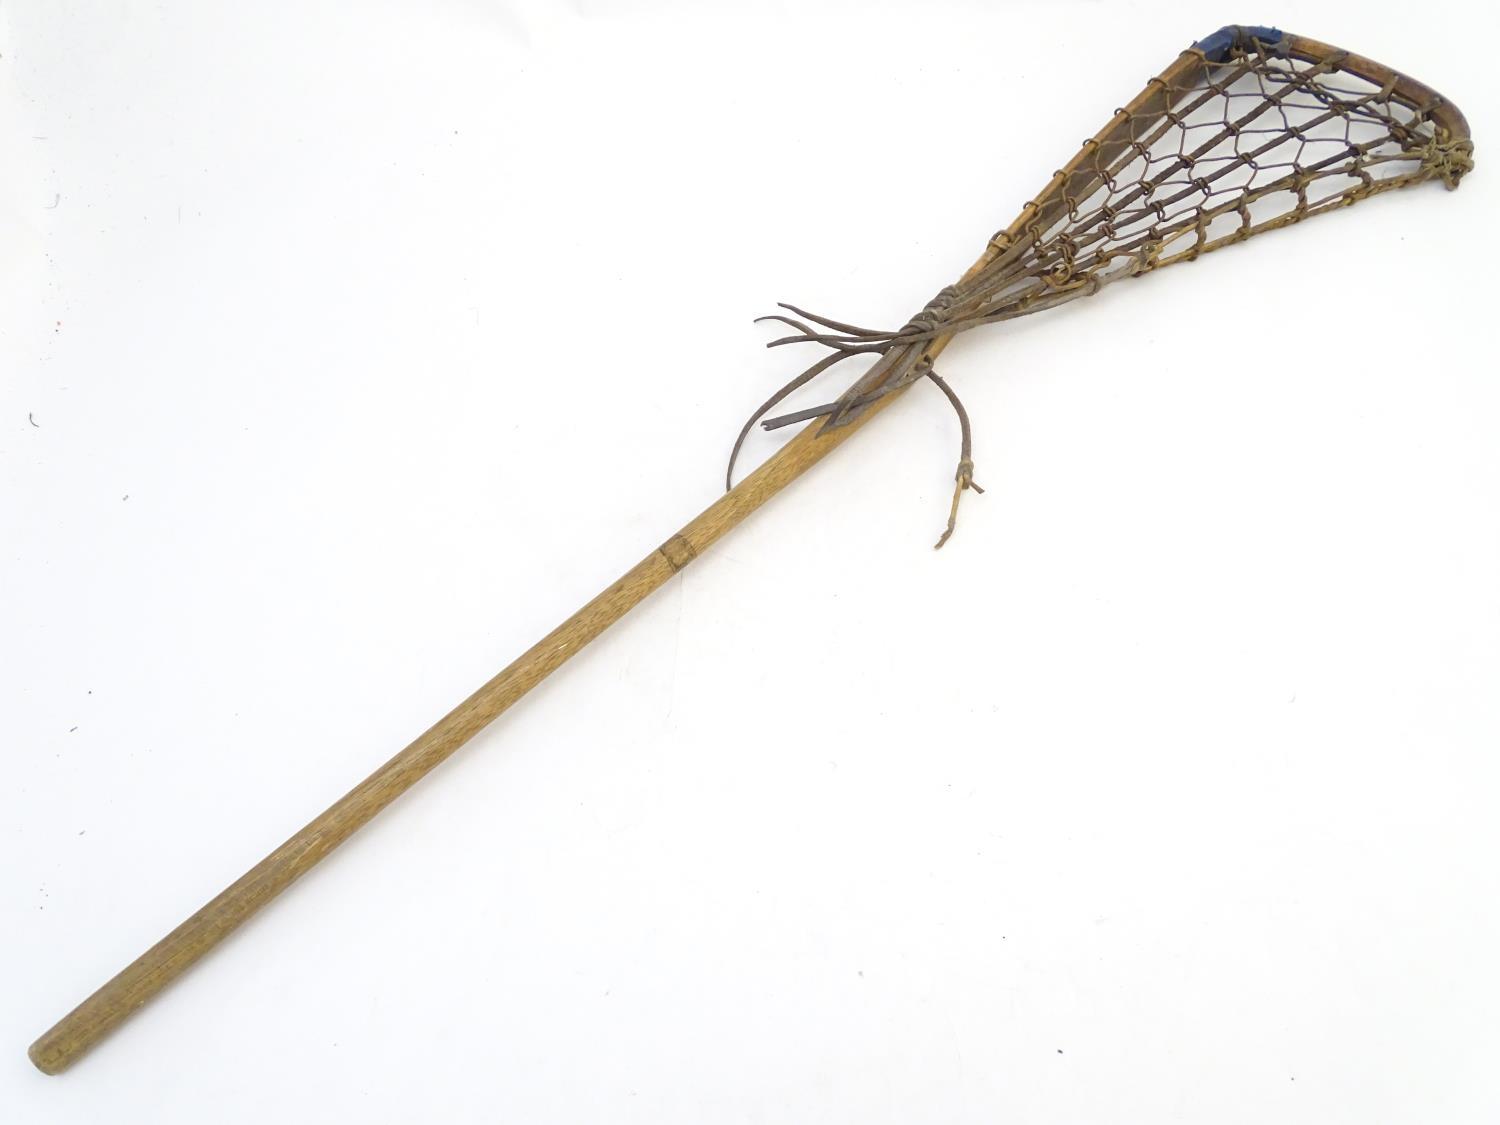 A Hattersley & Son wooden lacrosse stick / crosse, marked with maker and model Viktoria No. 1 to